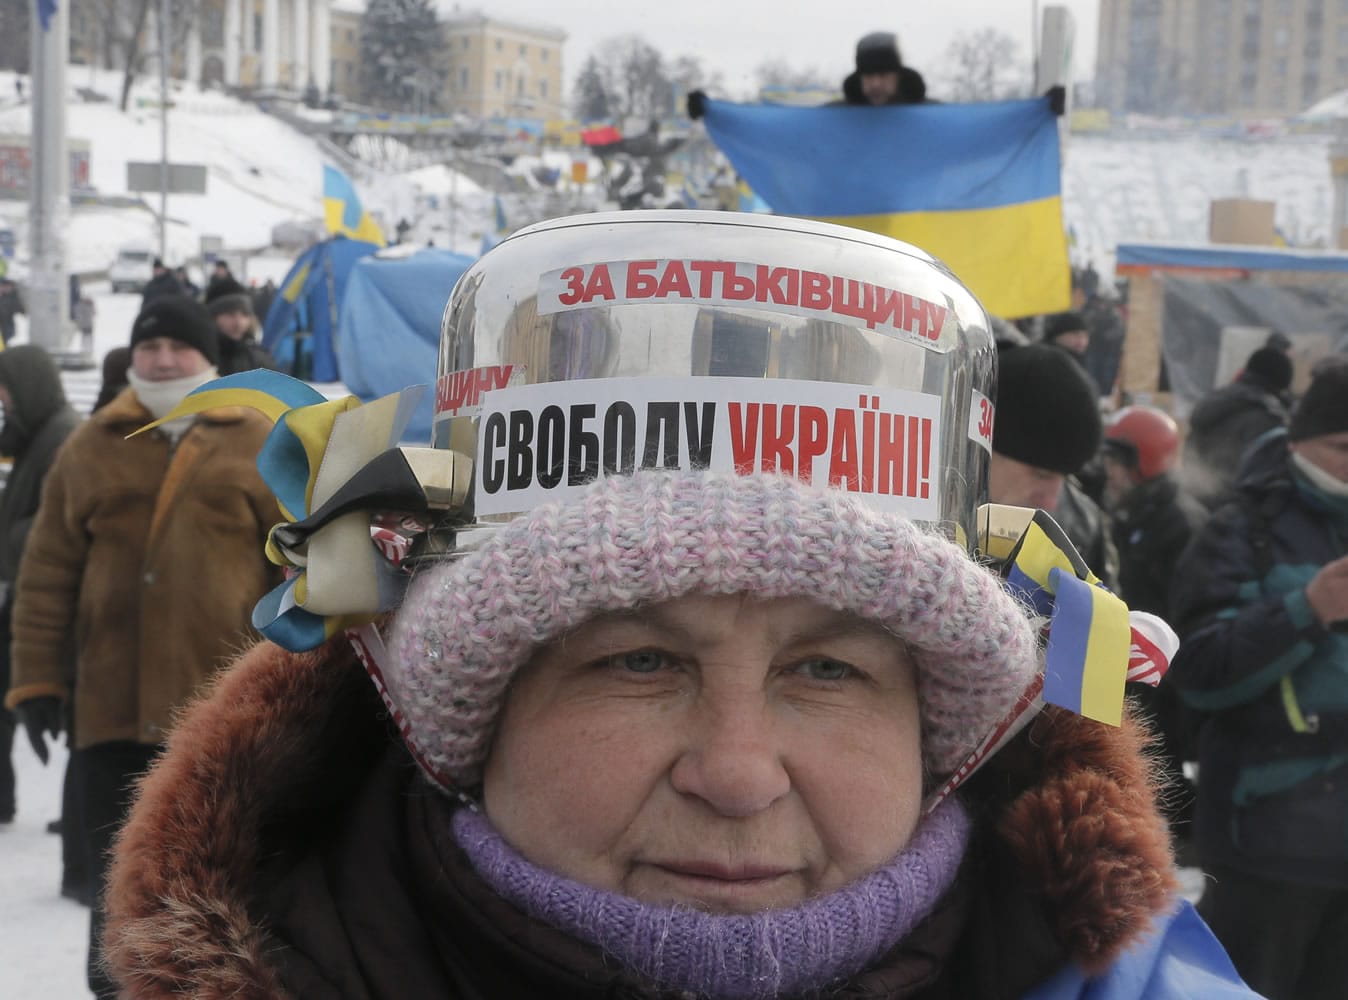 A pro-European Union activist, wearing a saucepan on her head as a protection helmet, attends a rally Wednesday in Independence Square in Kiev, Ukraine.